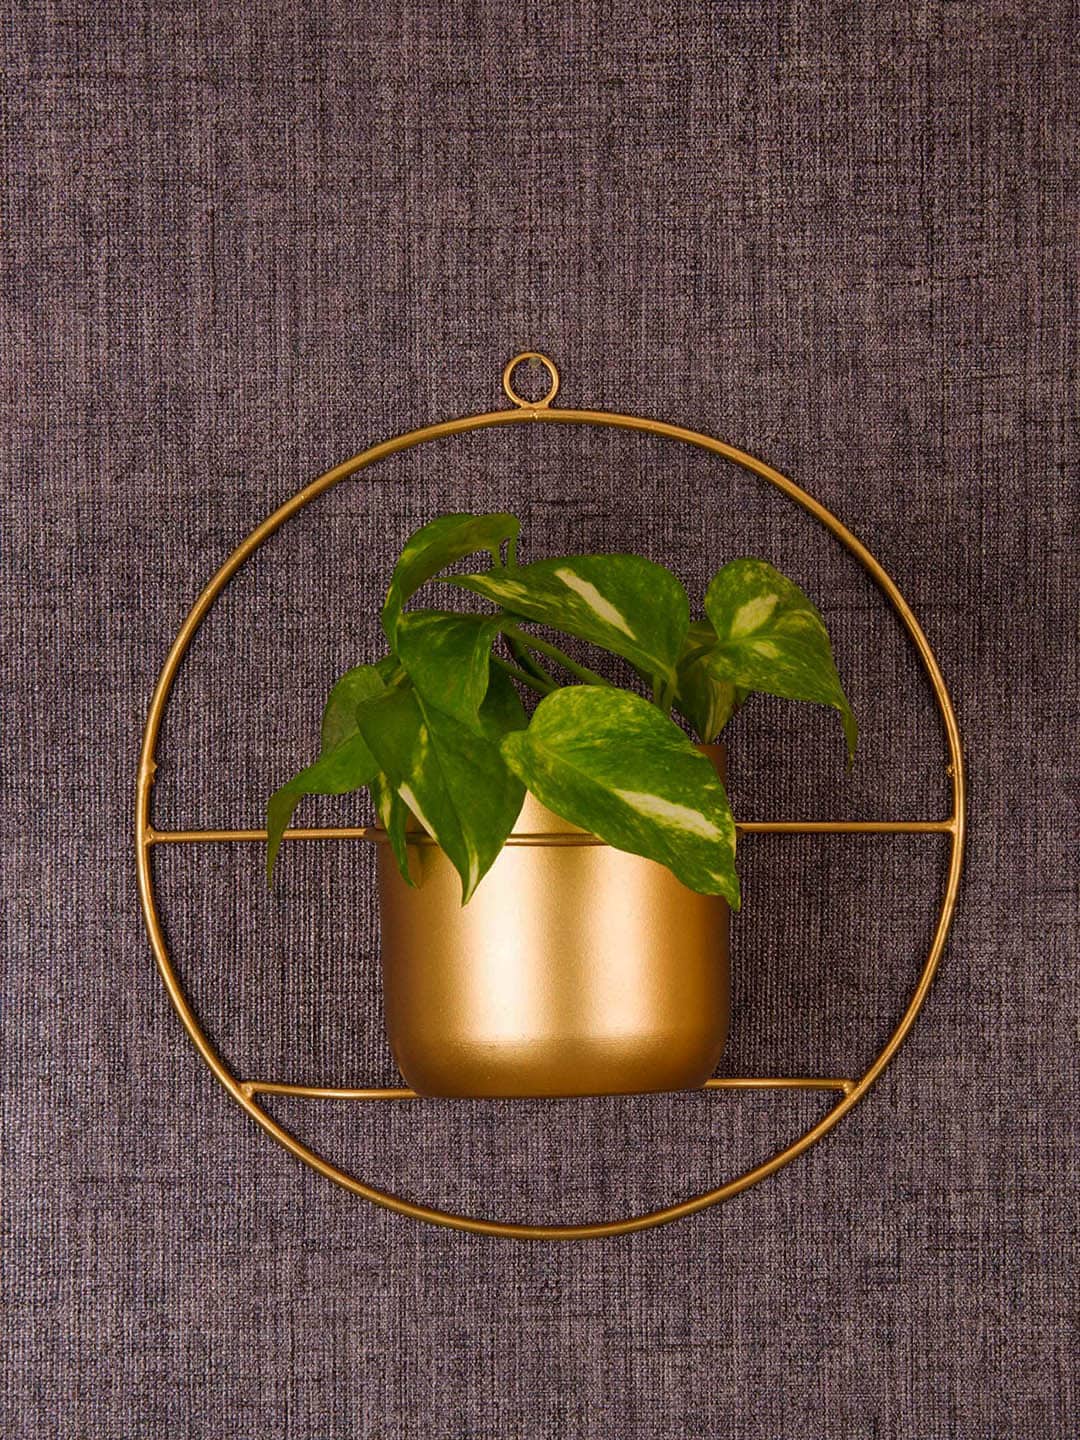 TIED RIBBONS Gold-Toned Solid Metal Wall Mounted Planter Price in India